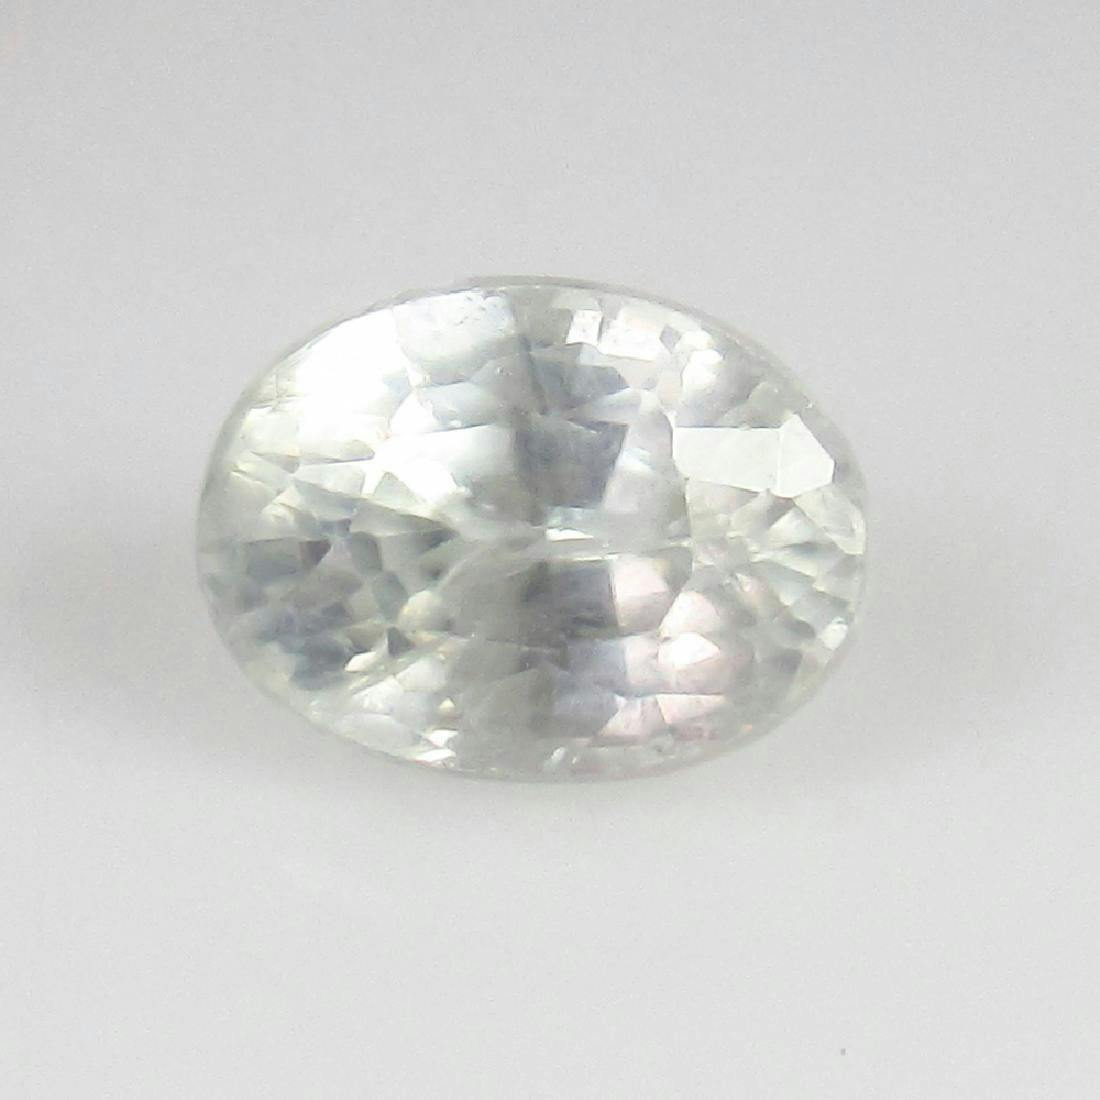 oval-cut white sapphire 2.26 cts